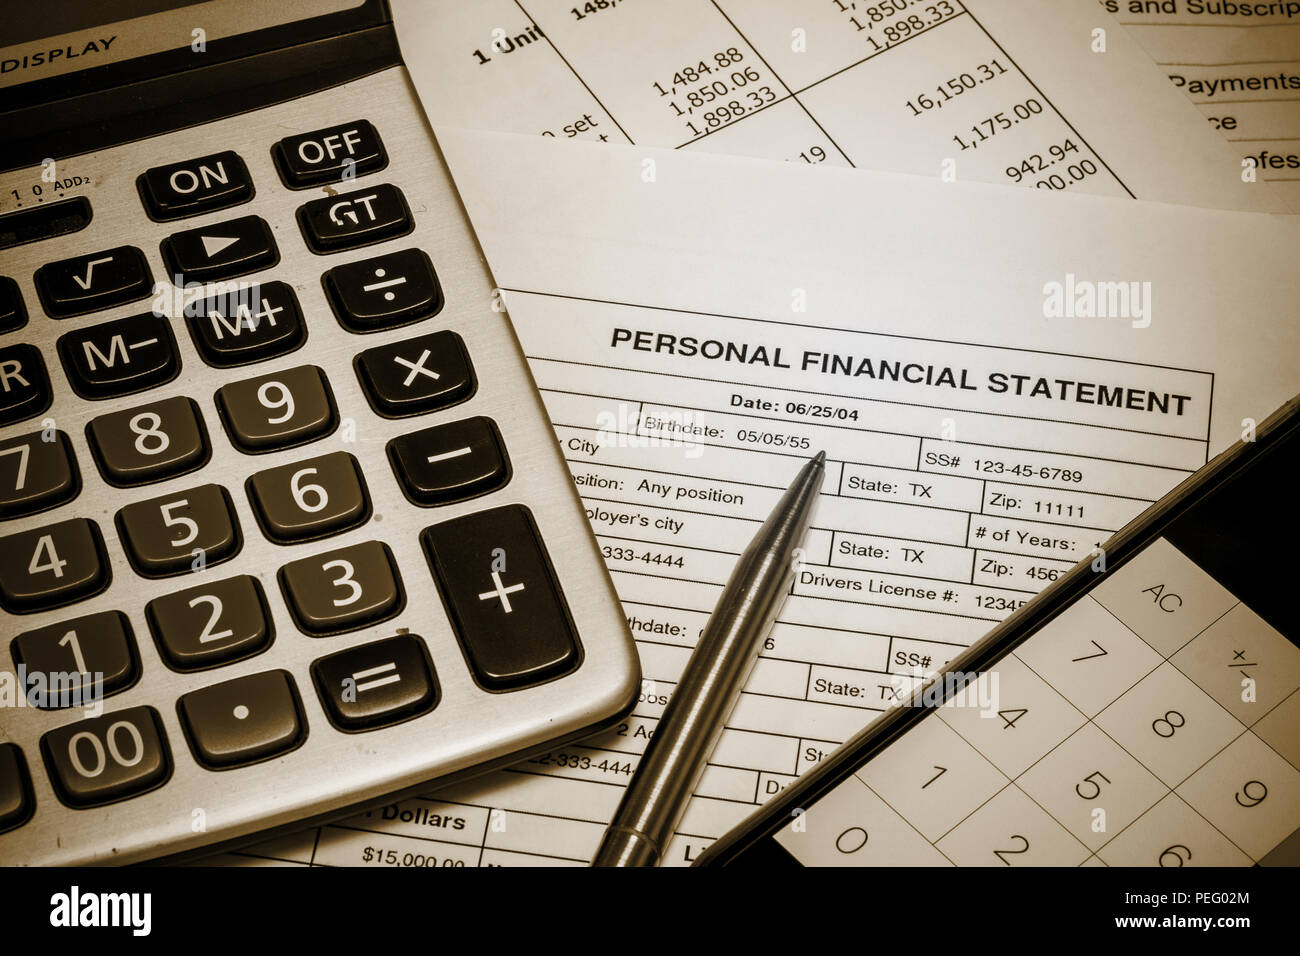 Personal financial statement document, calculator, pen and smartphone.  Vintage effect Stock Photo - Alamy